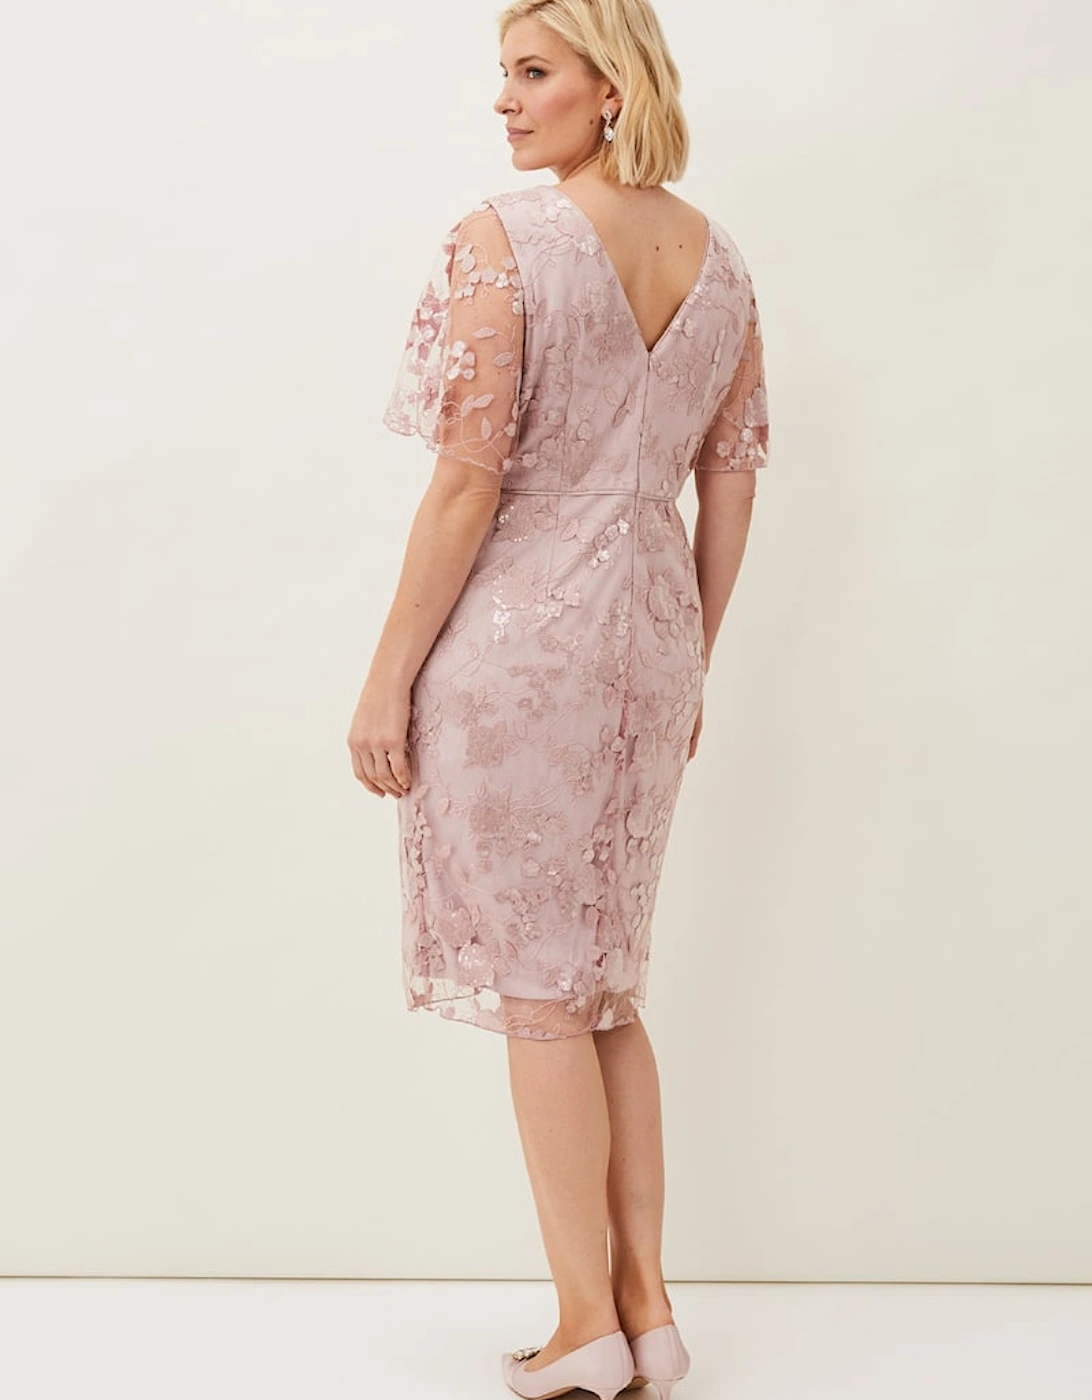 Harlow Sequin Lace Dress